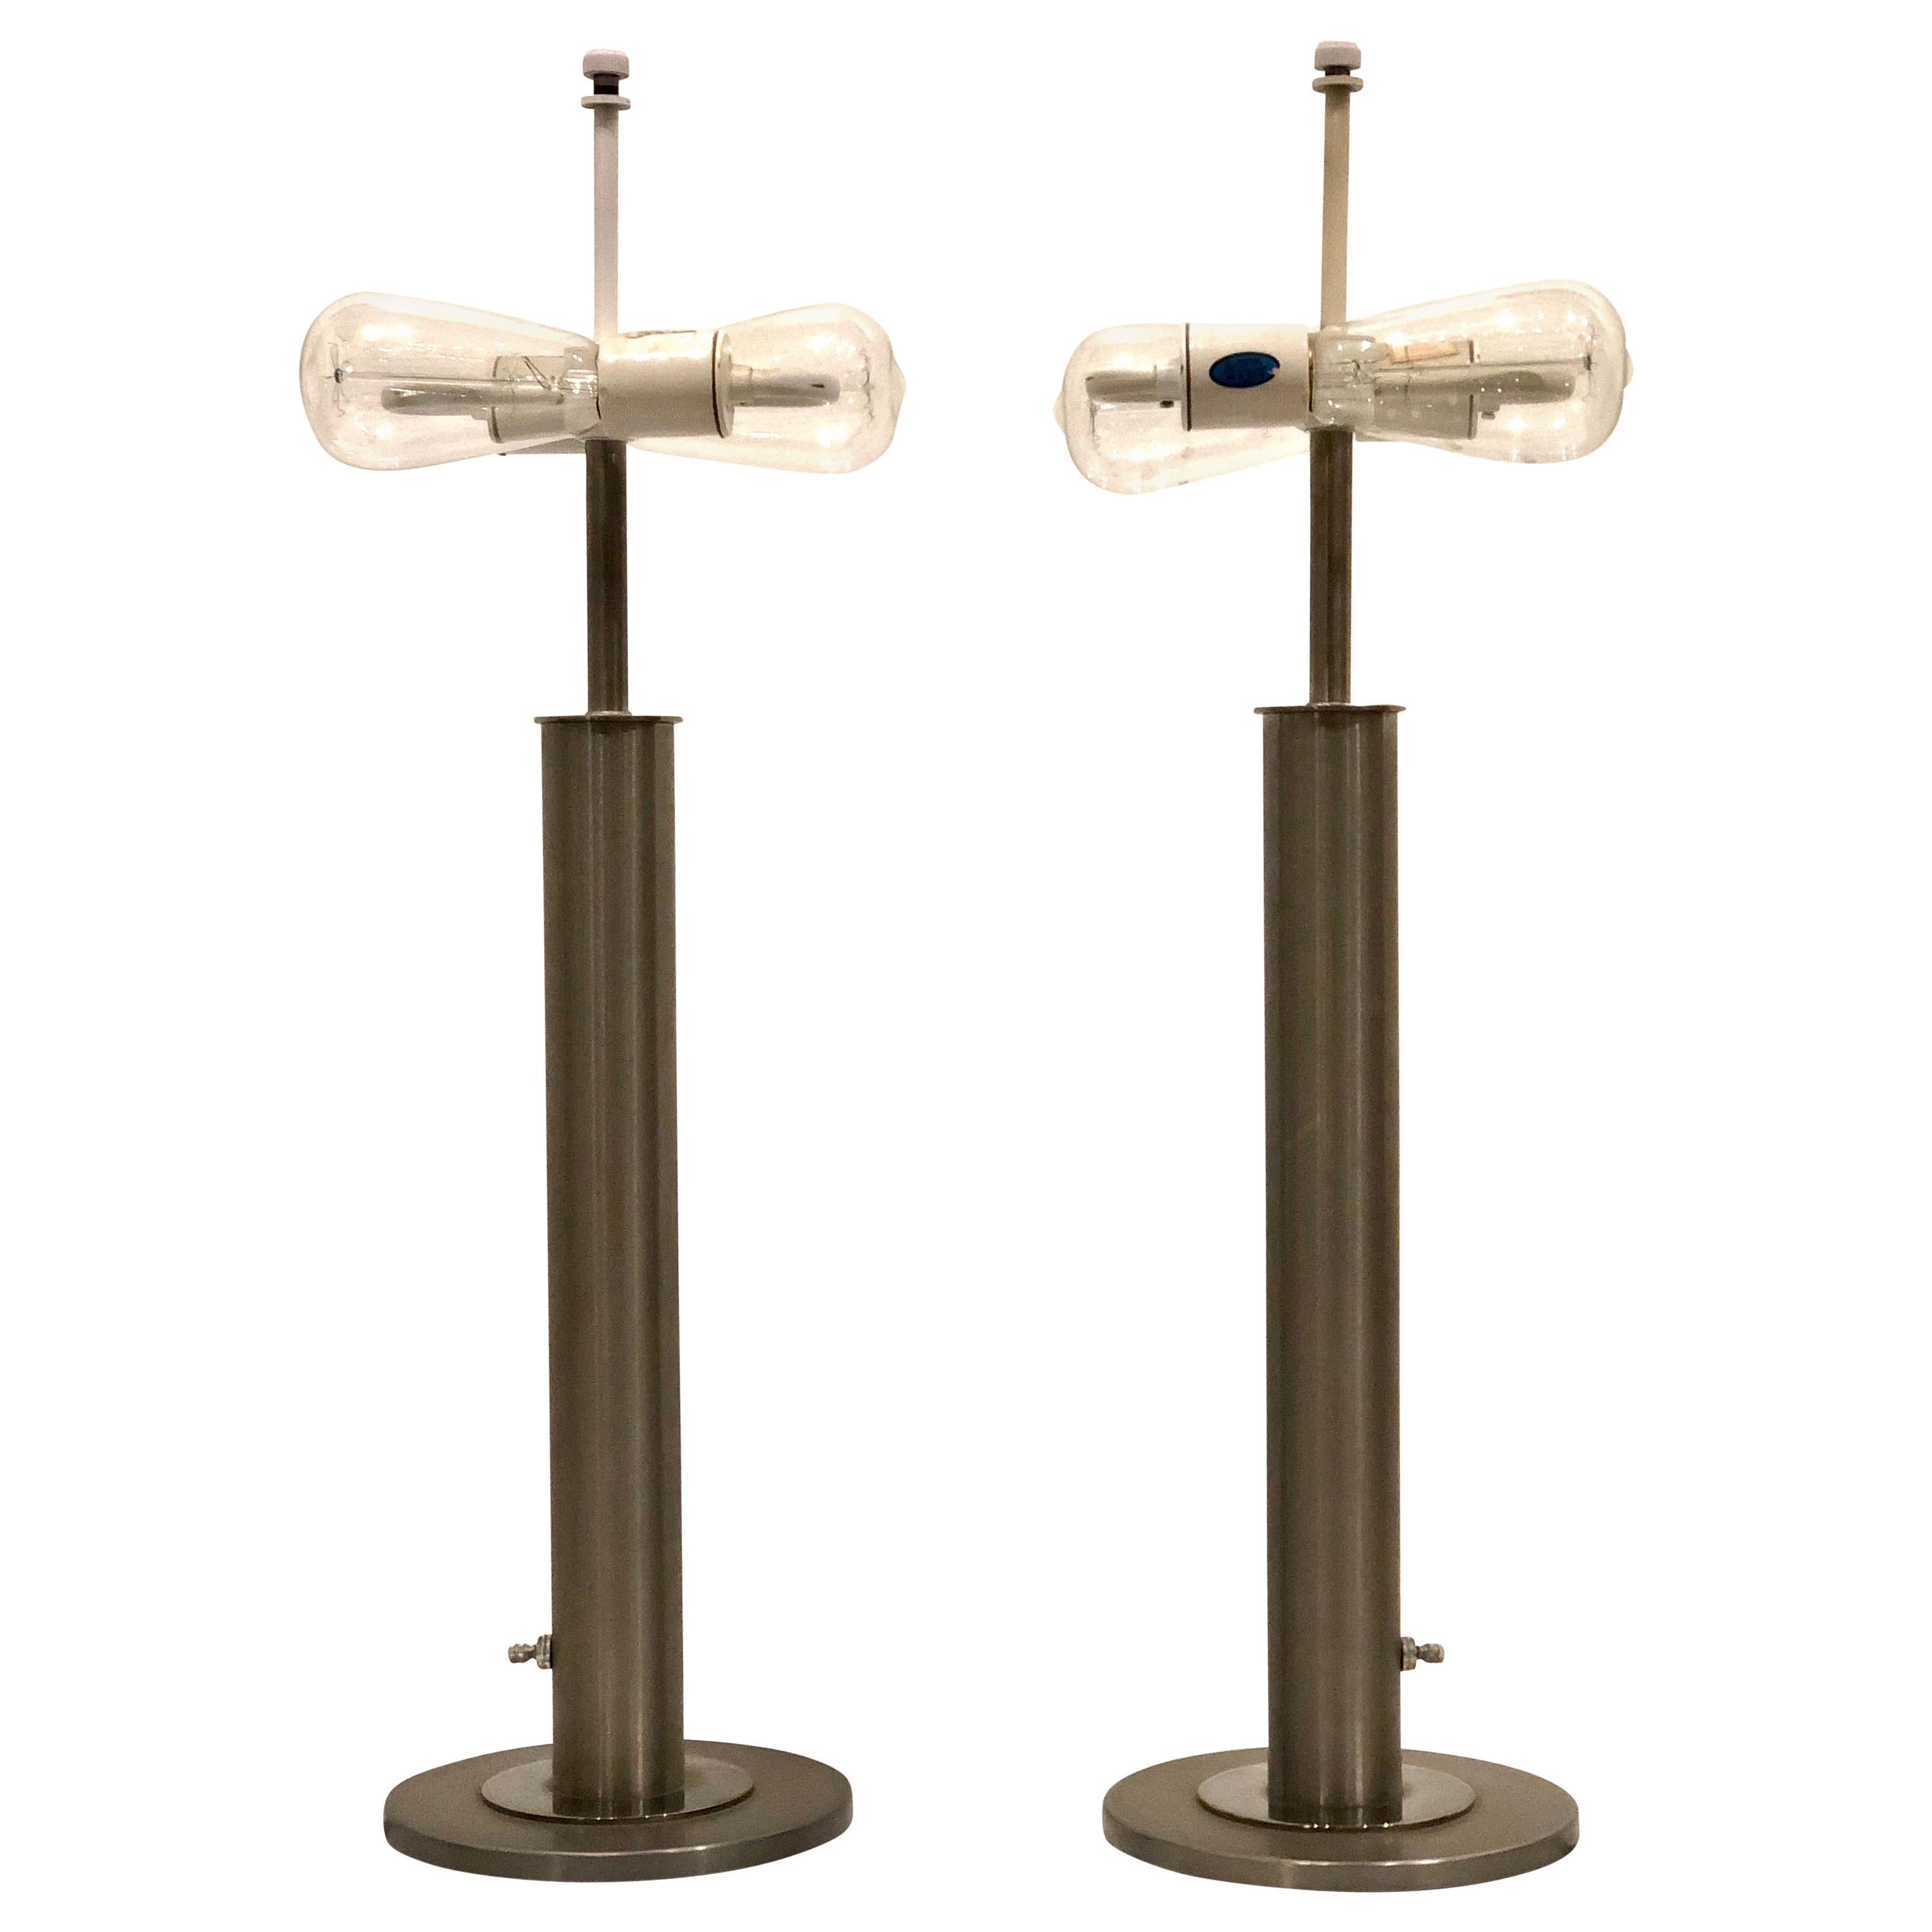 Pair of Table Lamps in Brushed Steel and Chrome by Nessen Studios